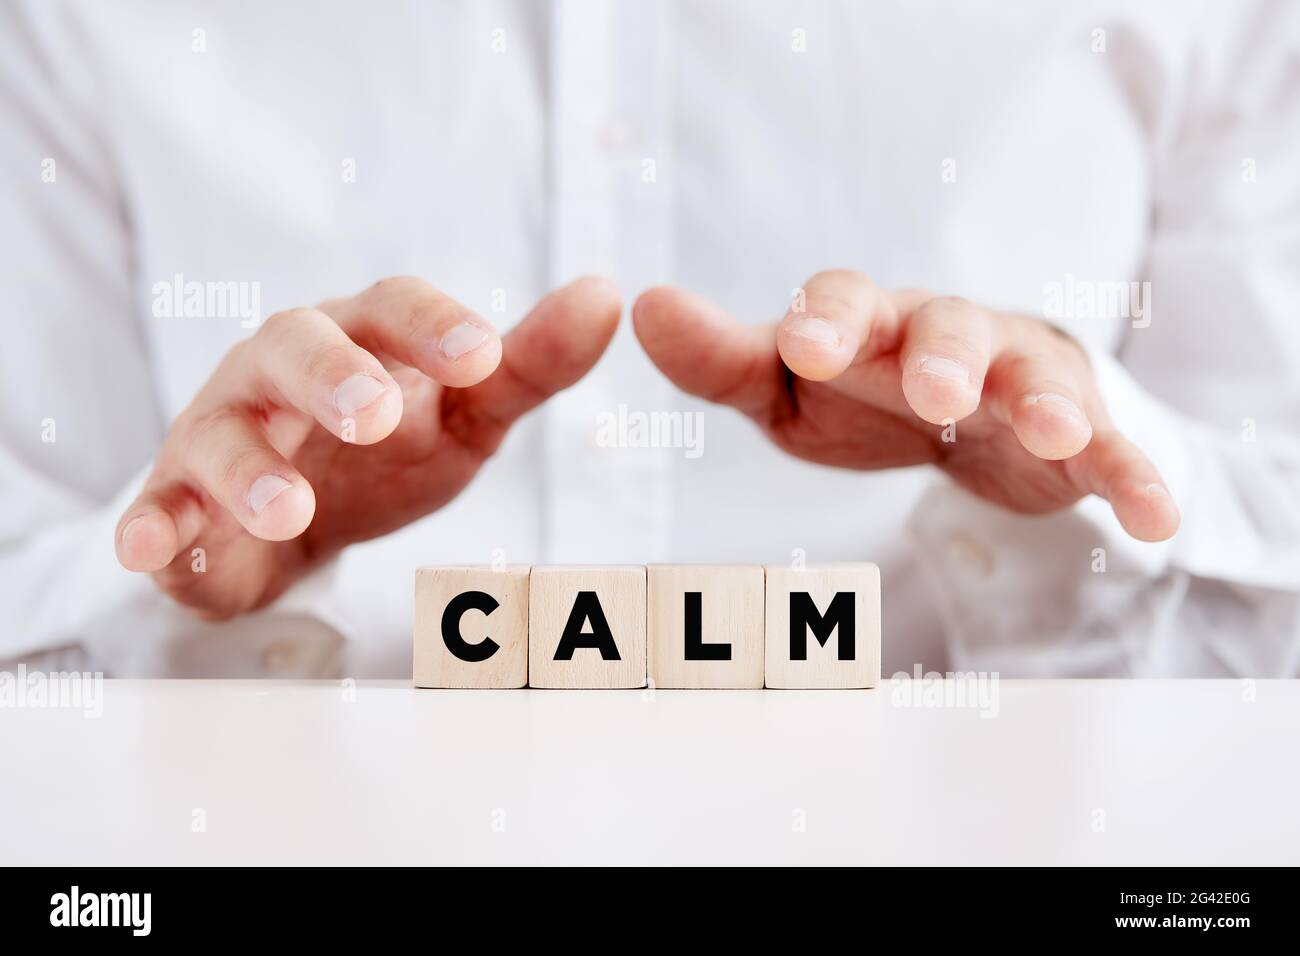 Man holding his hands over the wooden cubes with the word calm. Keep calm, tranquility concept. Stock Photo